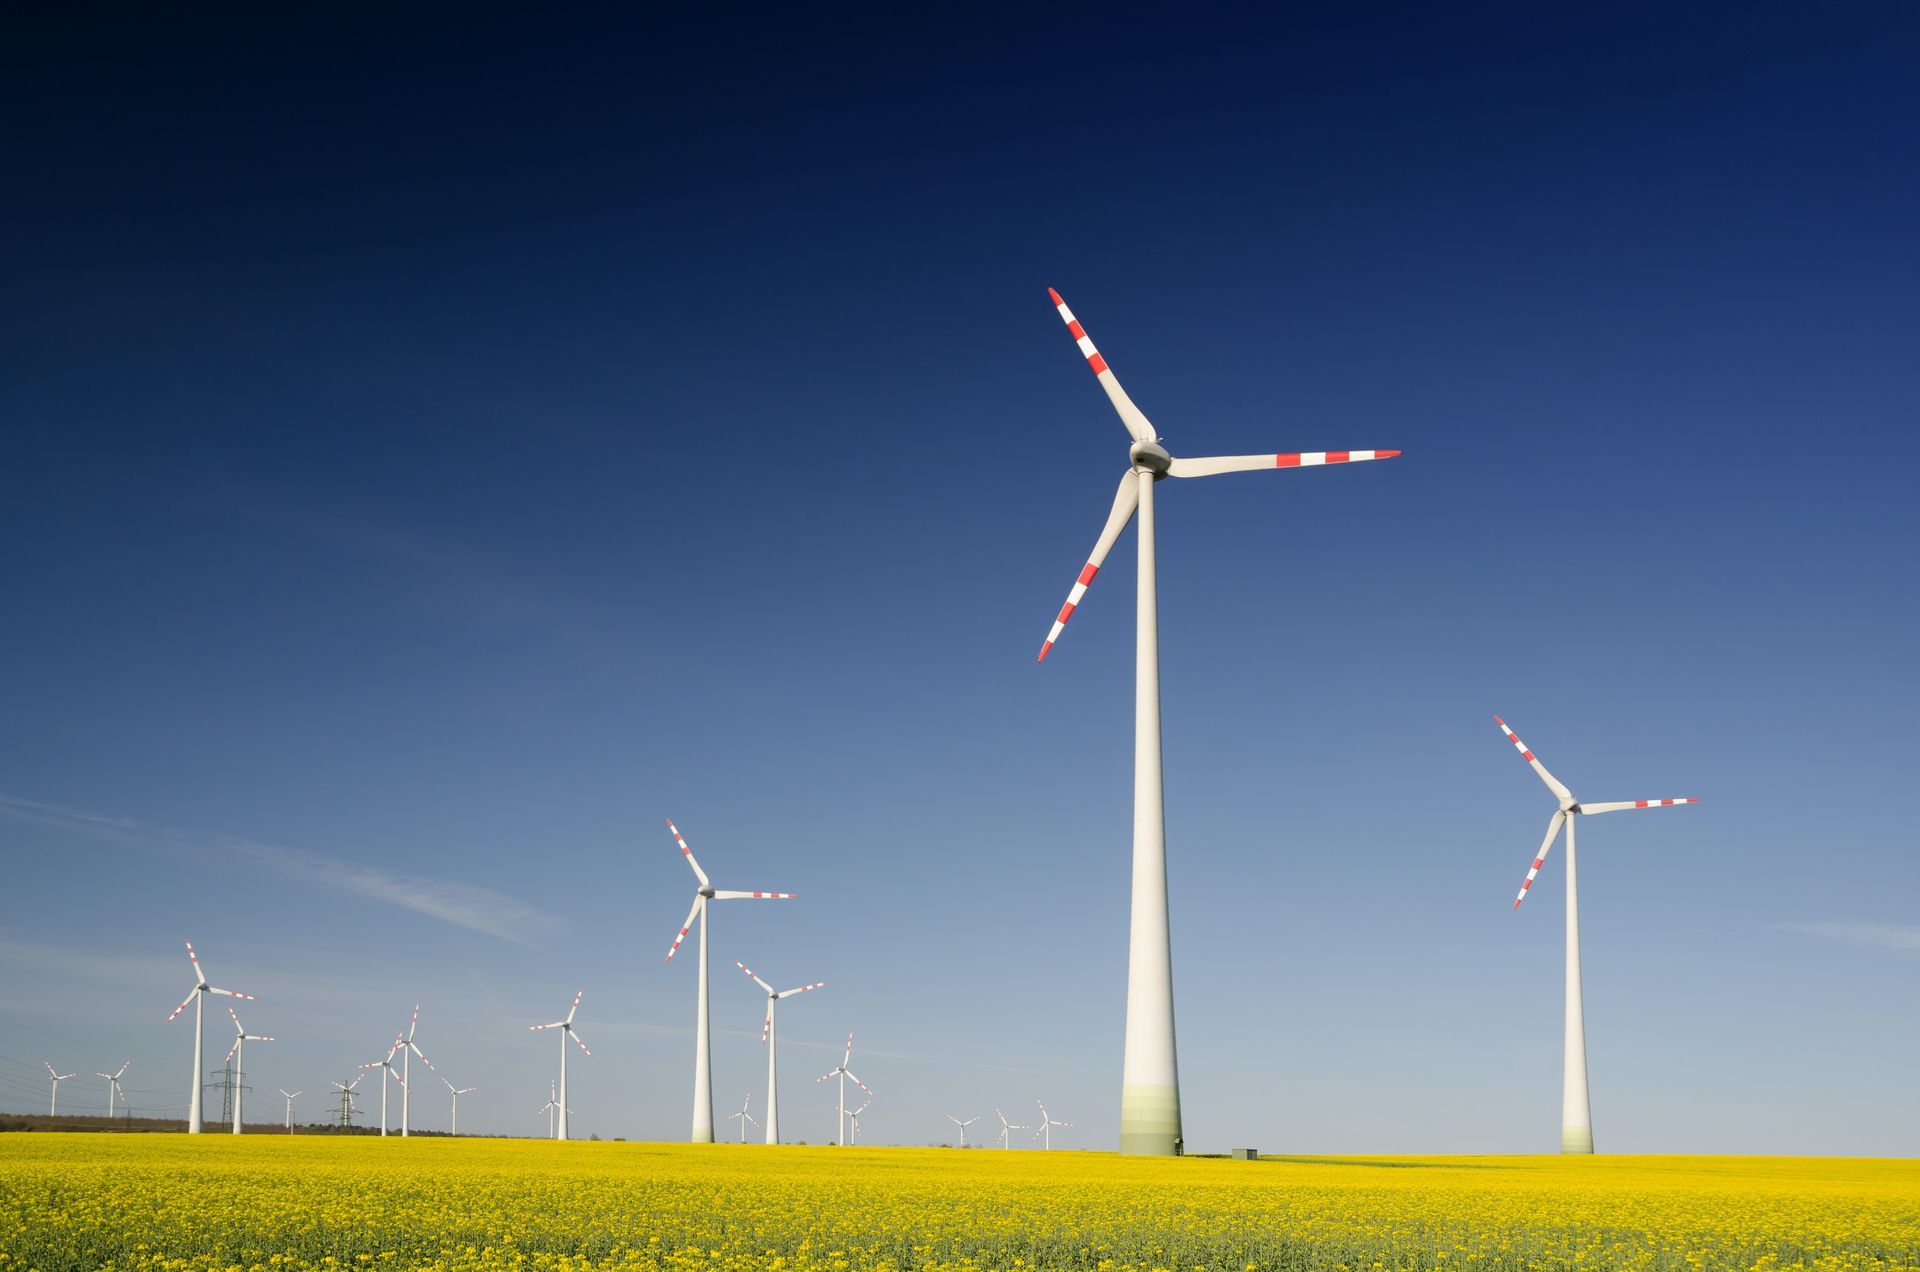 A row of wind turbines in a field of yellow flowers